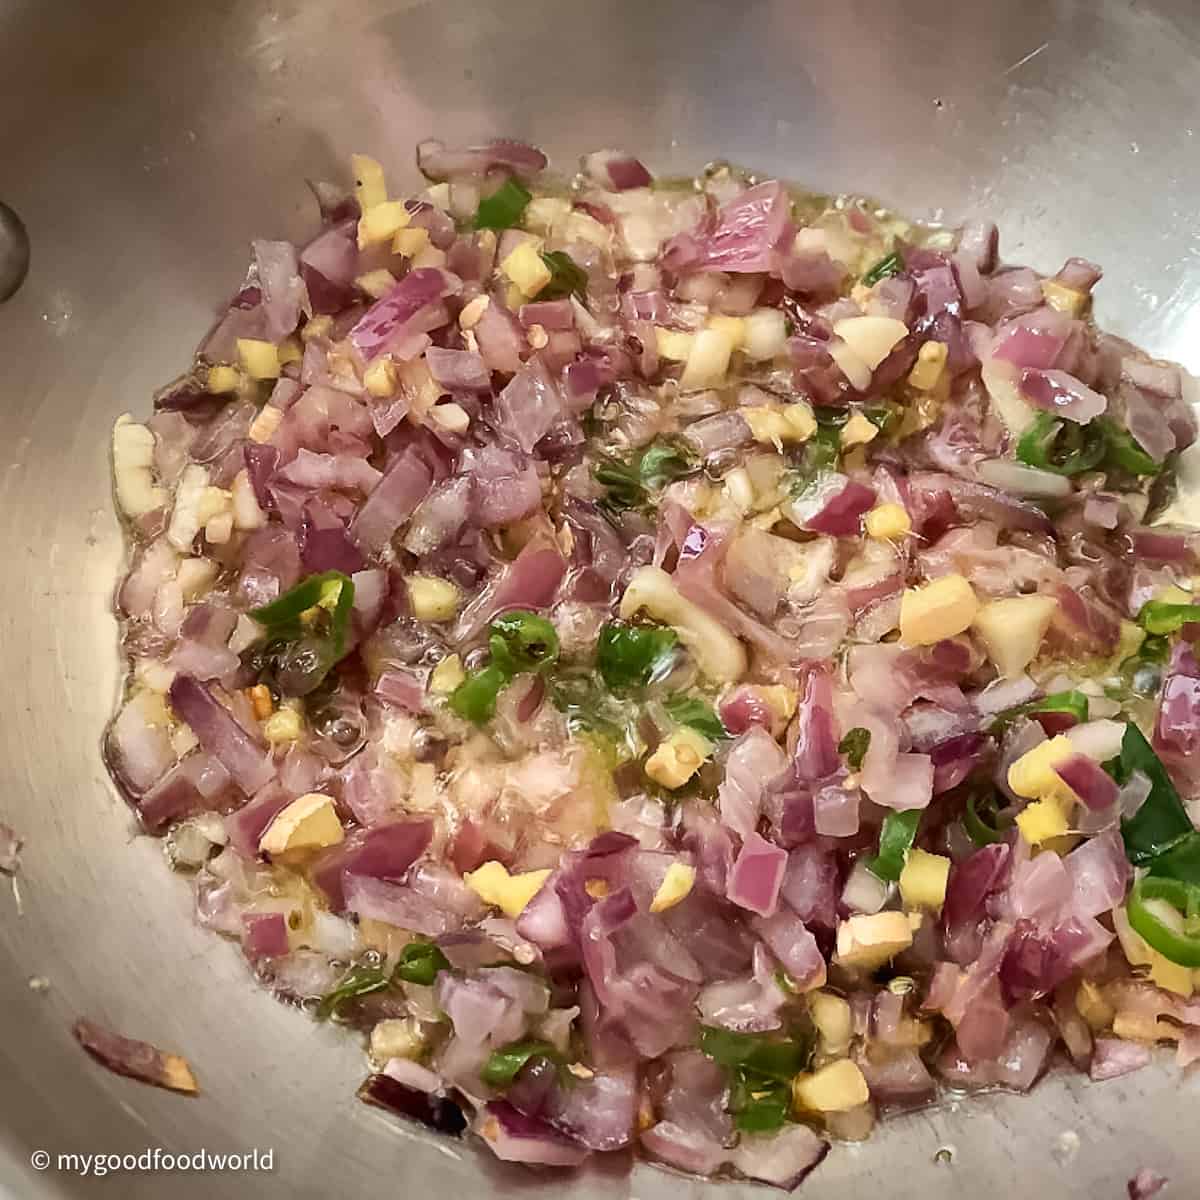 Finely chopped onions, garlic, ginger, and chili peppers frying in oil.